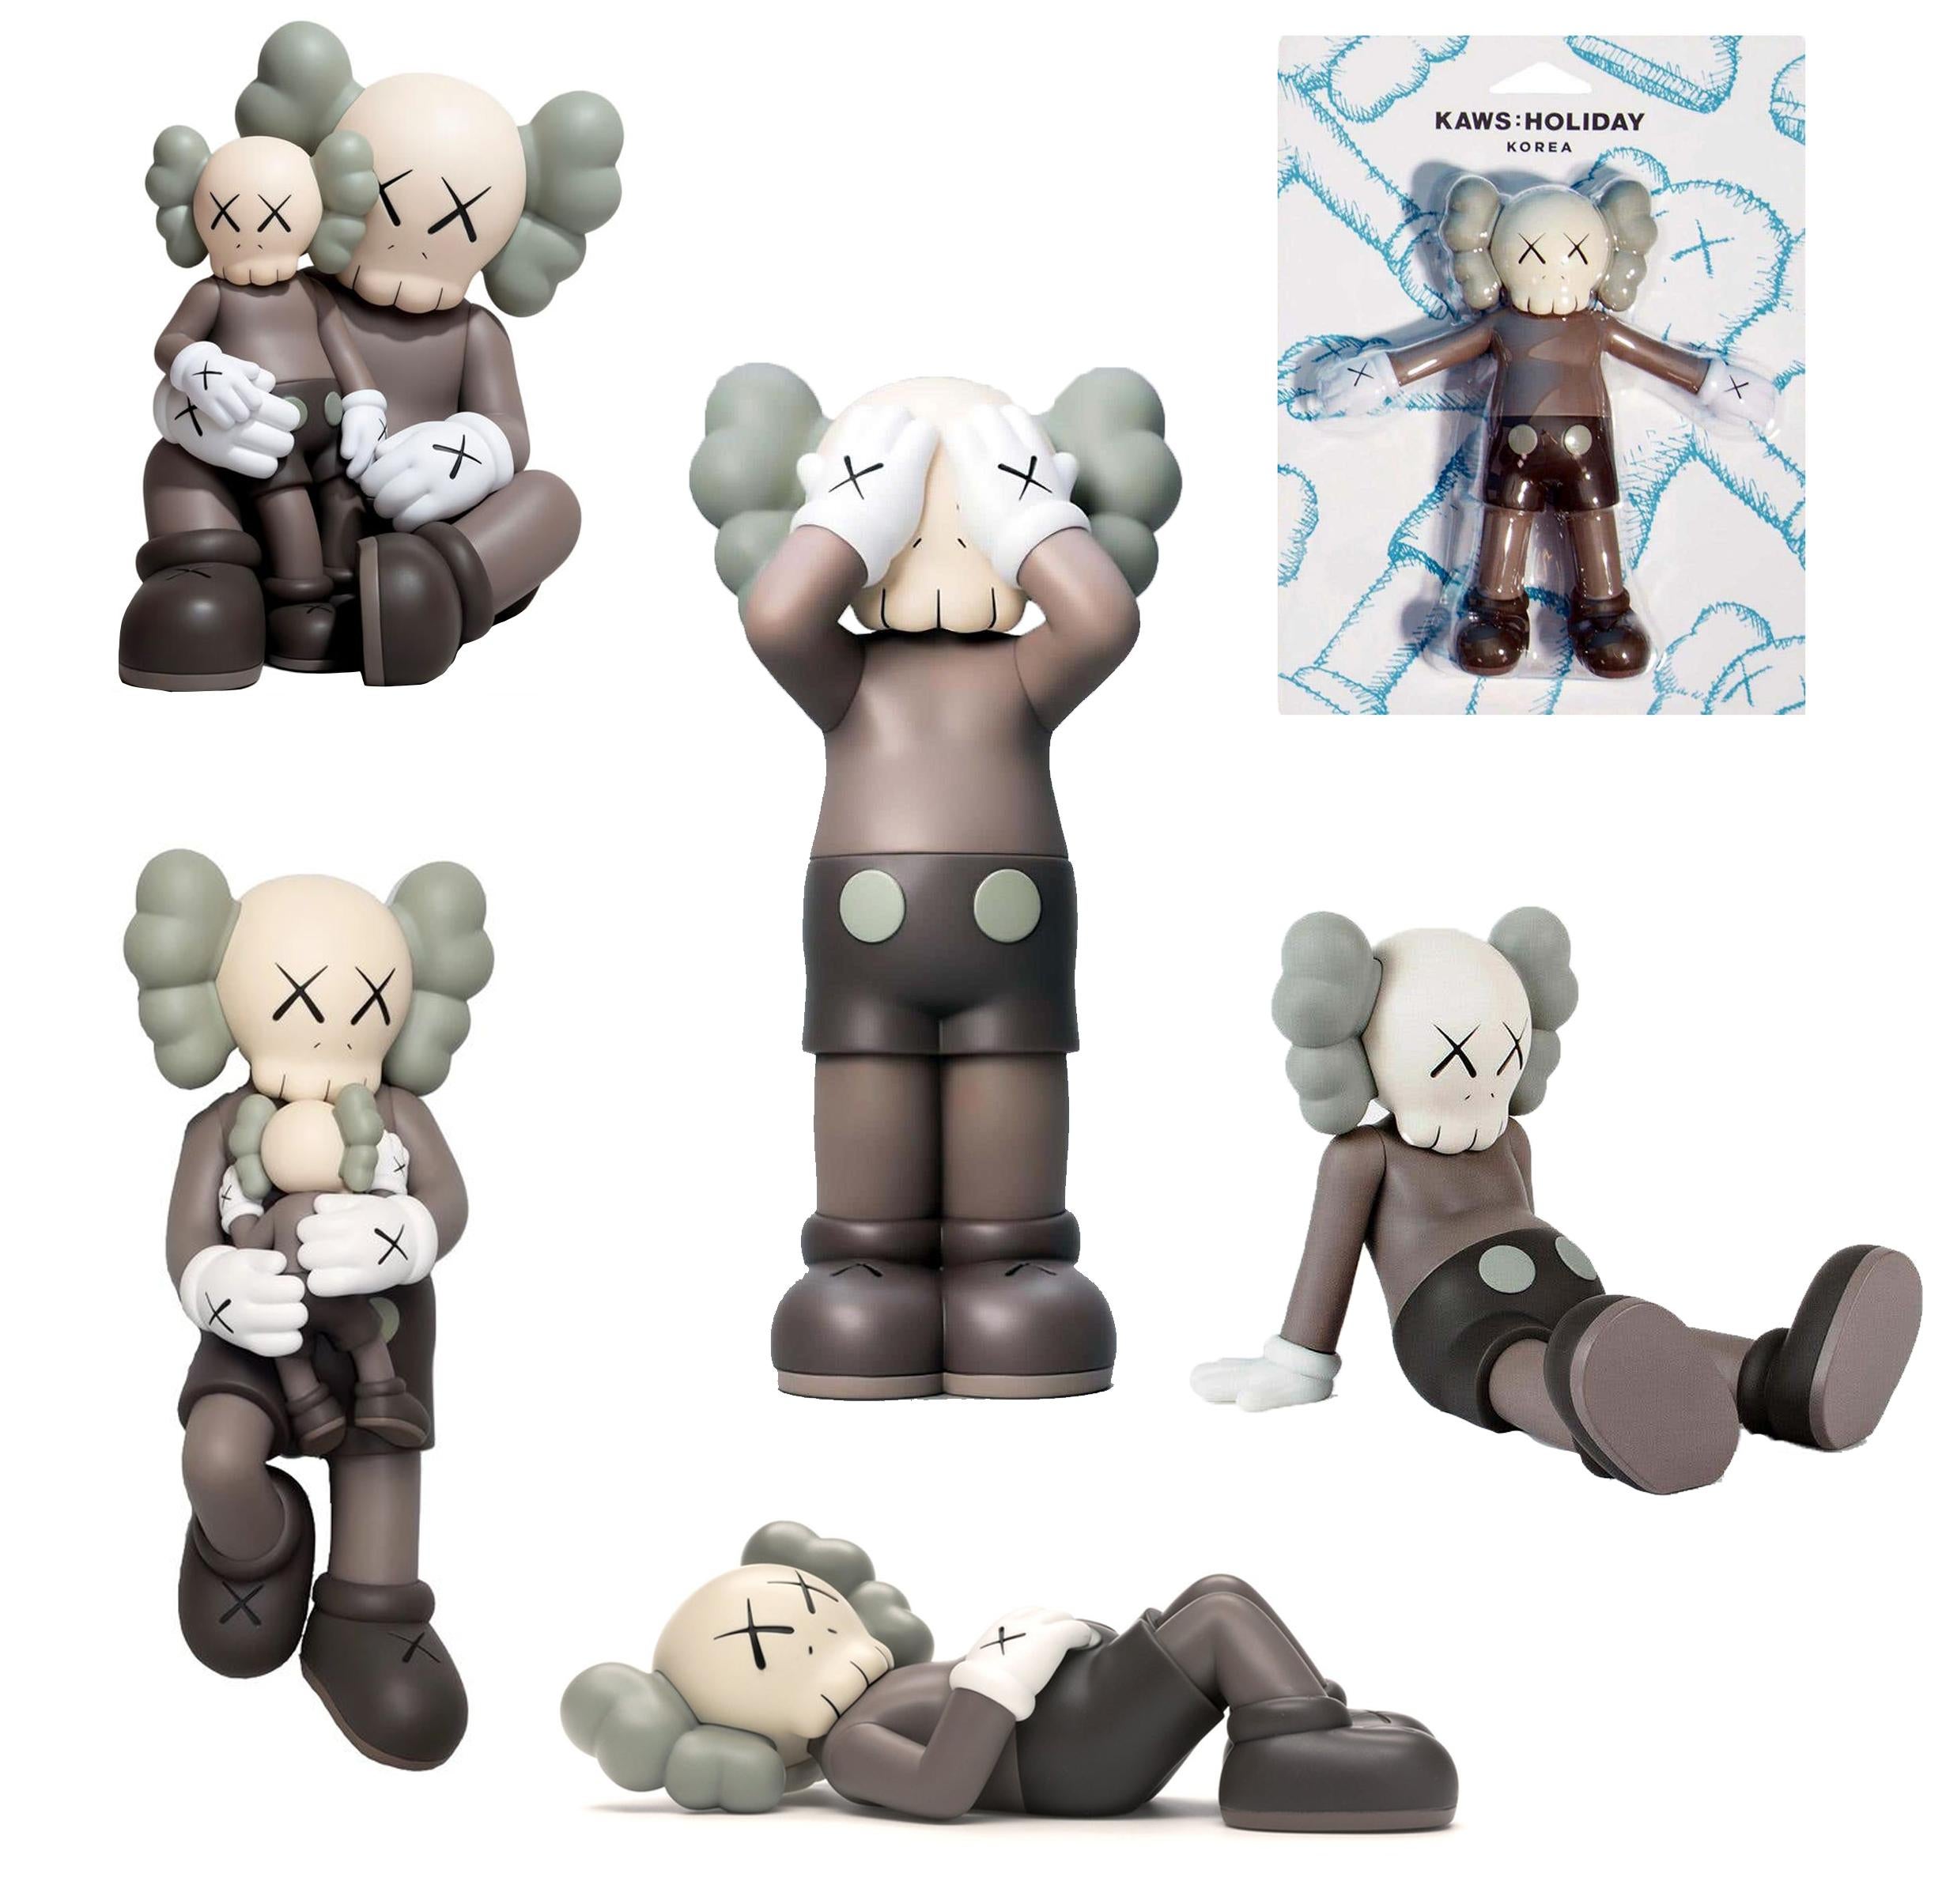 KAWS Holiday Companion 2018-2021:
A curated set of 32 individual KAWS HOLIDAY Companions; these highly decorative KAWS Companions were produced in conjunction with KAWS’ widely popular, traveling art installation, ‘HOLIDAY'- spanning worldwide